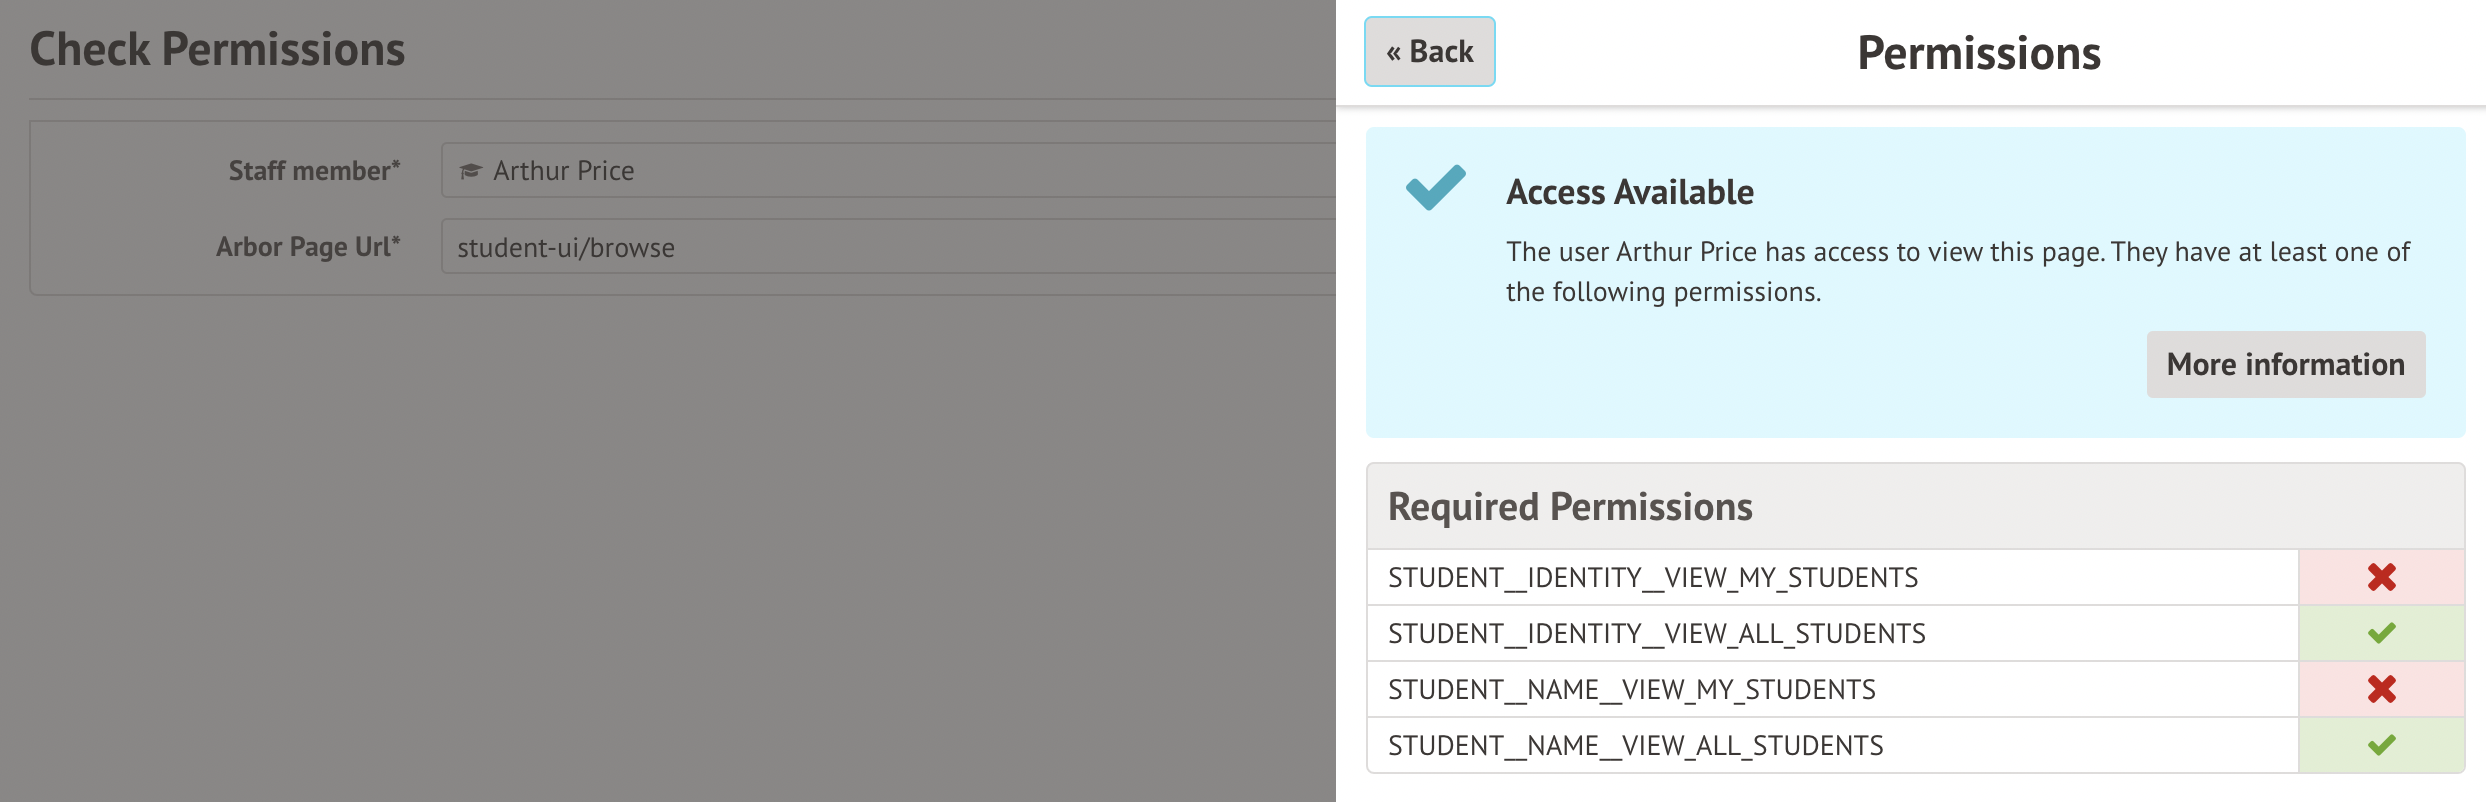 access_available.png